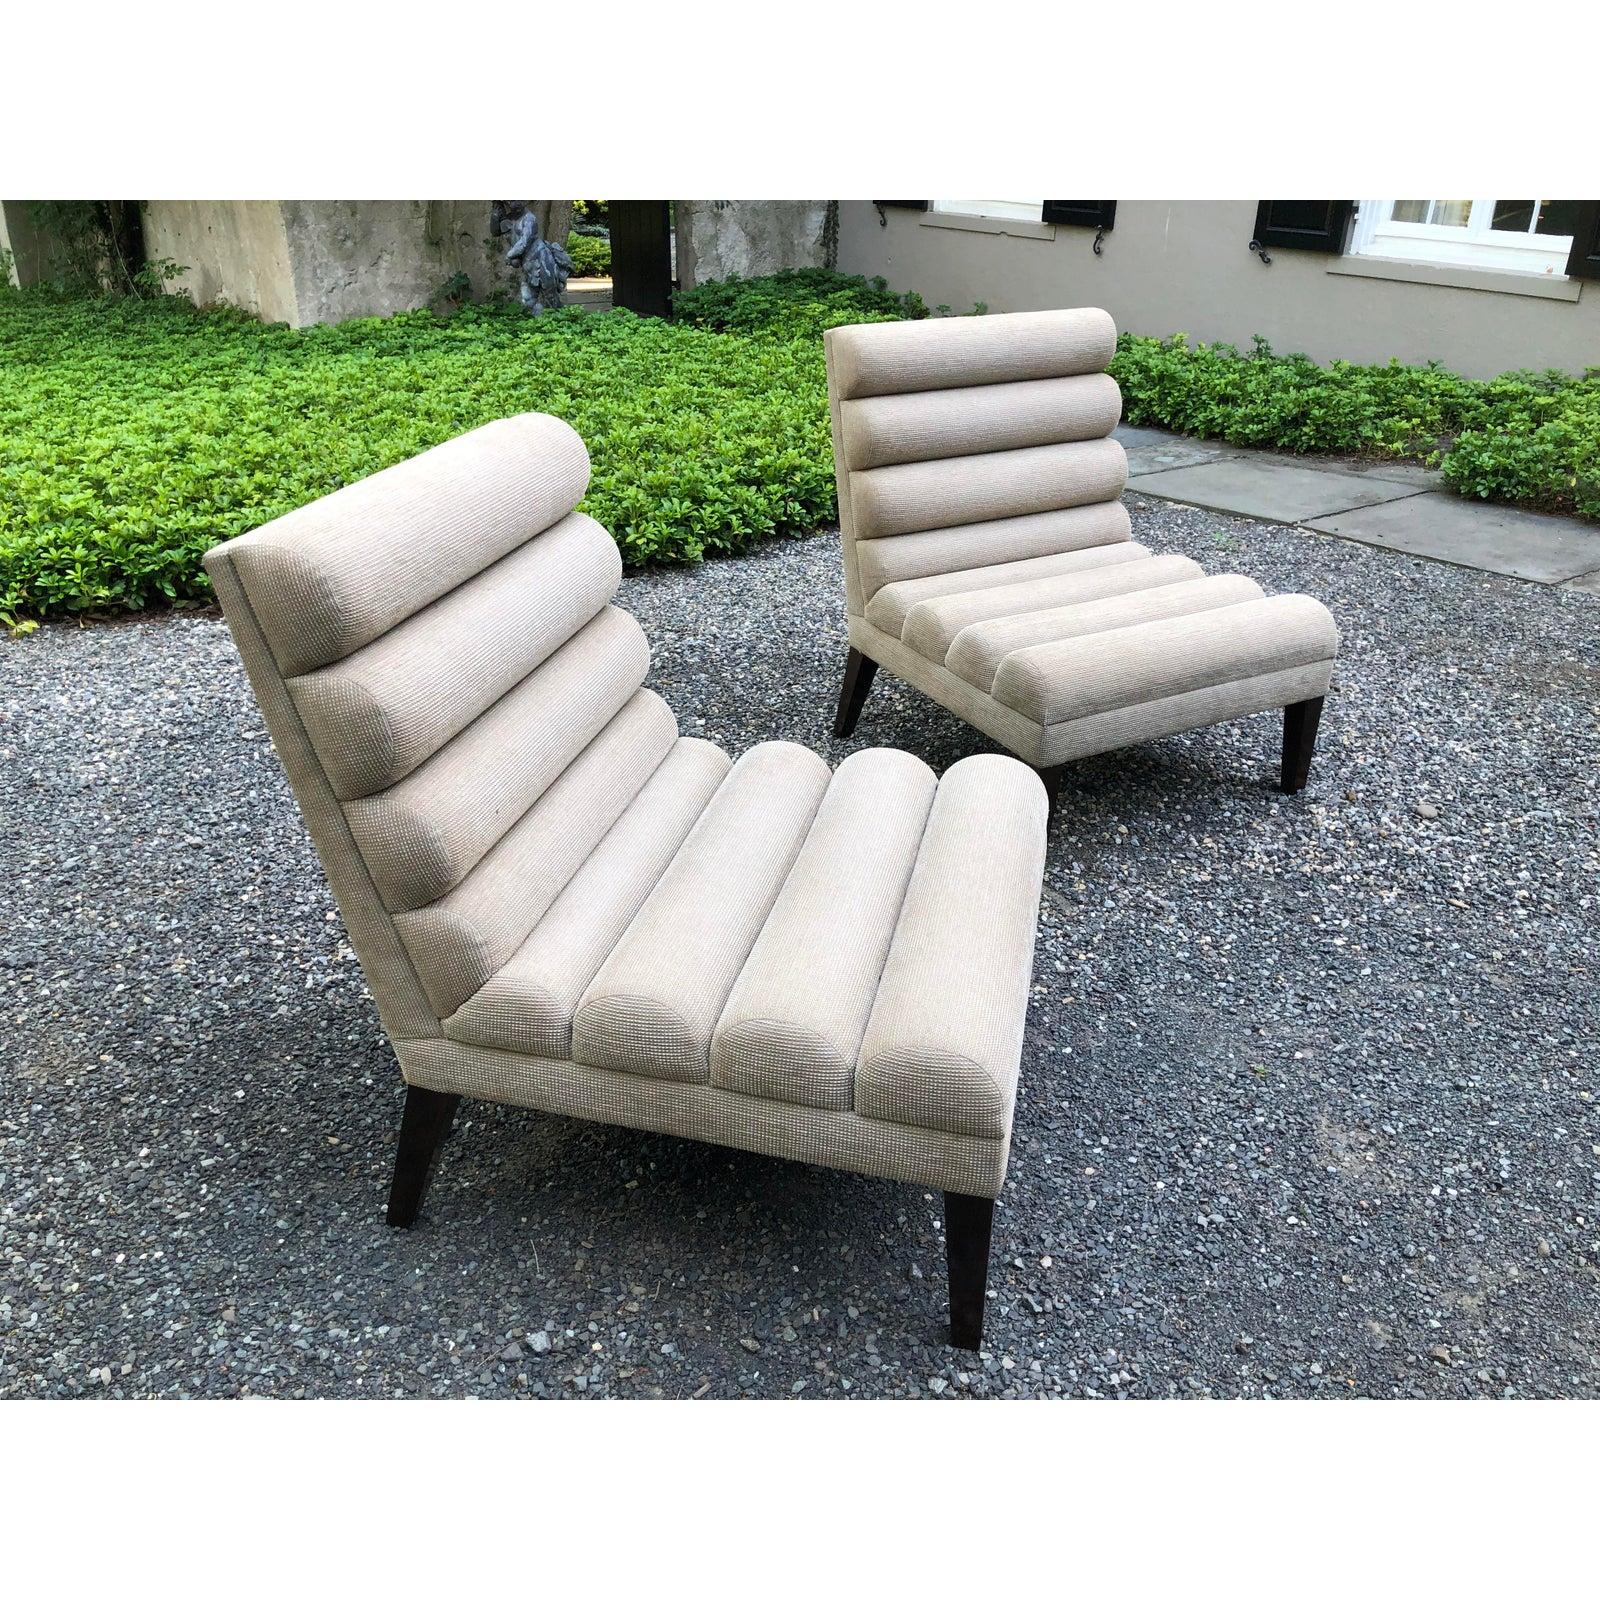 Super Chic Pair of Mid-Century Modern Channel Back Slipper Chairs 1